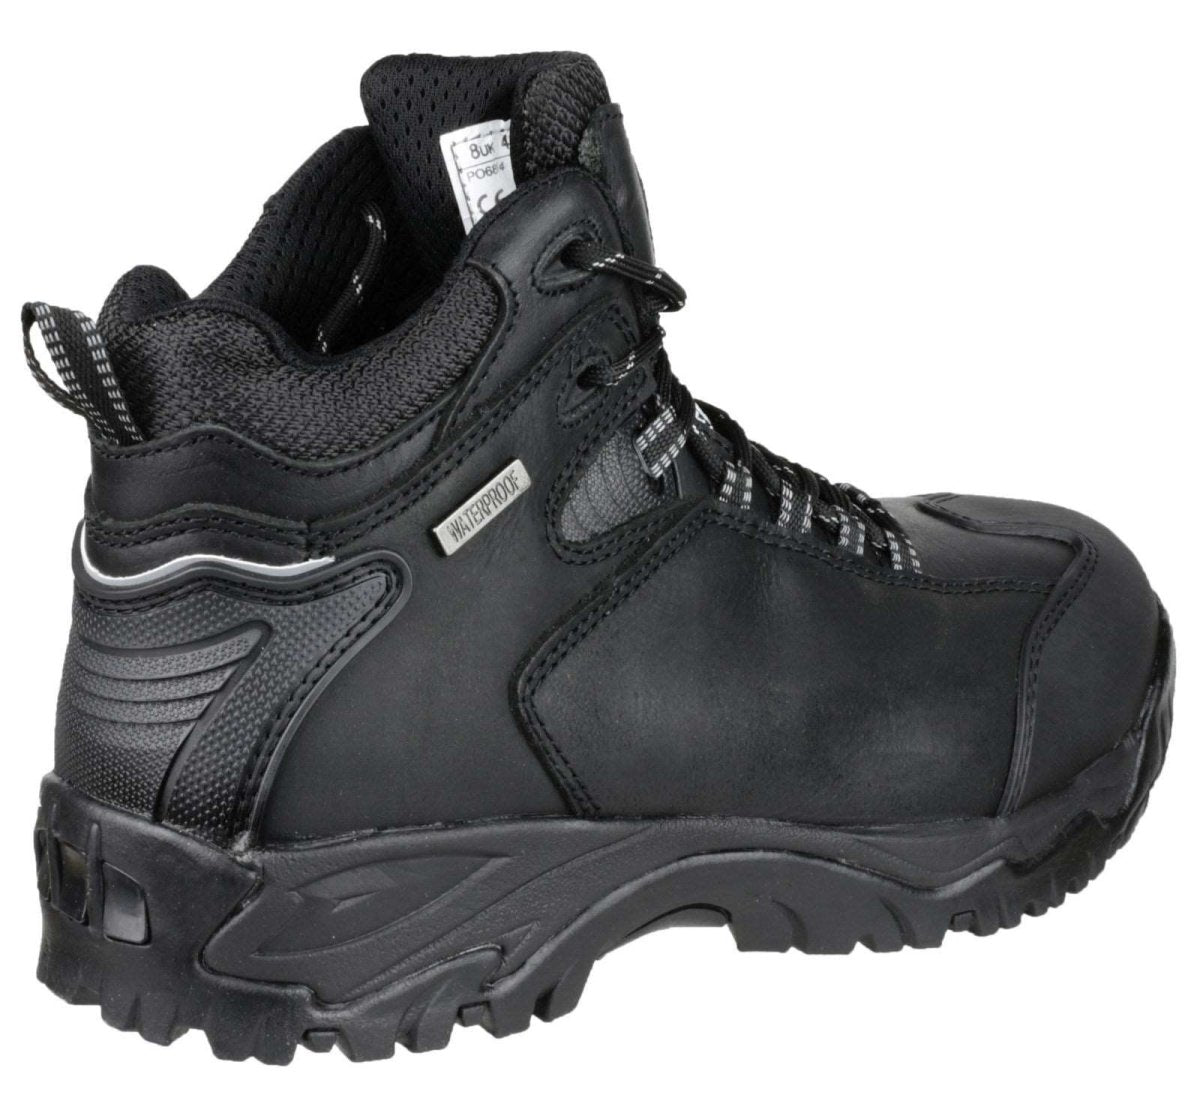 Amblers FS190 Waterproof Hiker Safety Boots - Shoe Store Direct